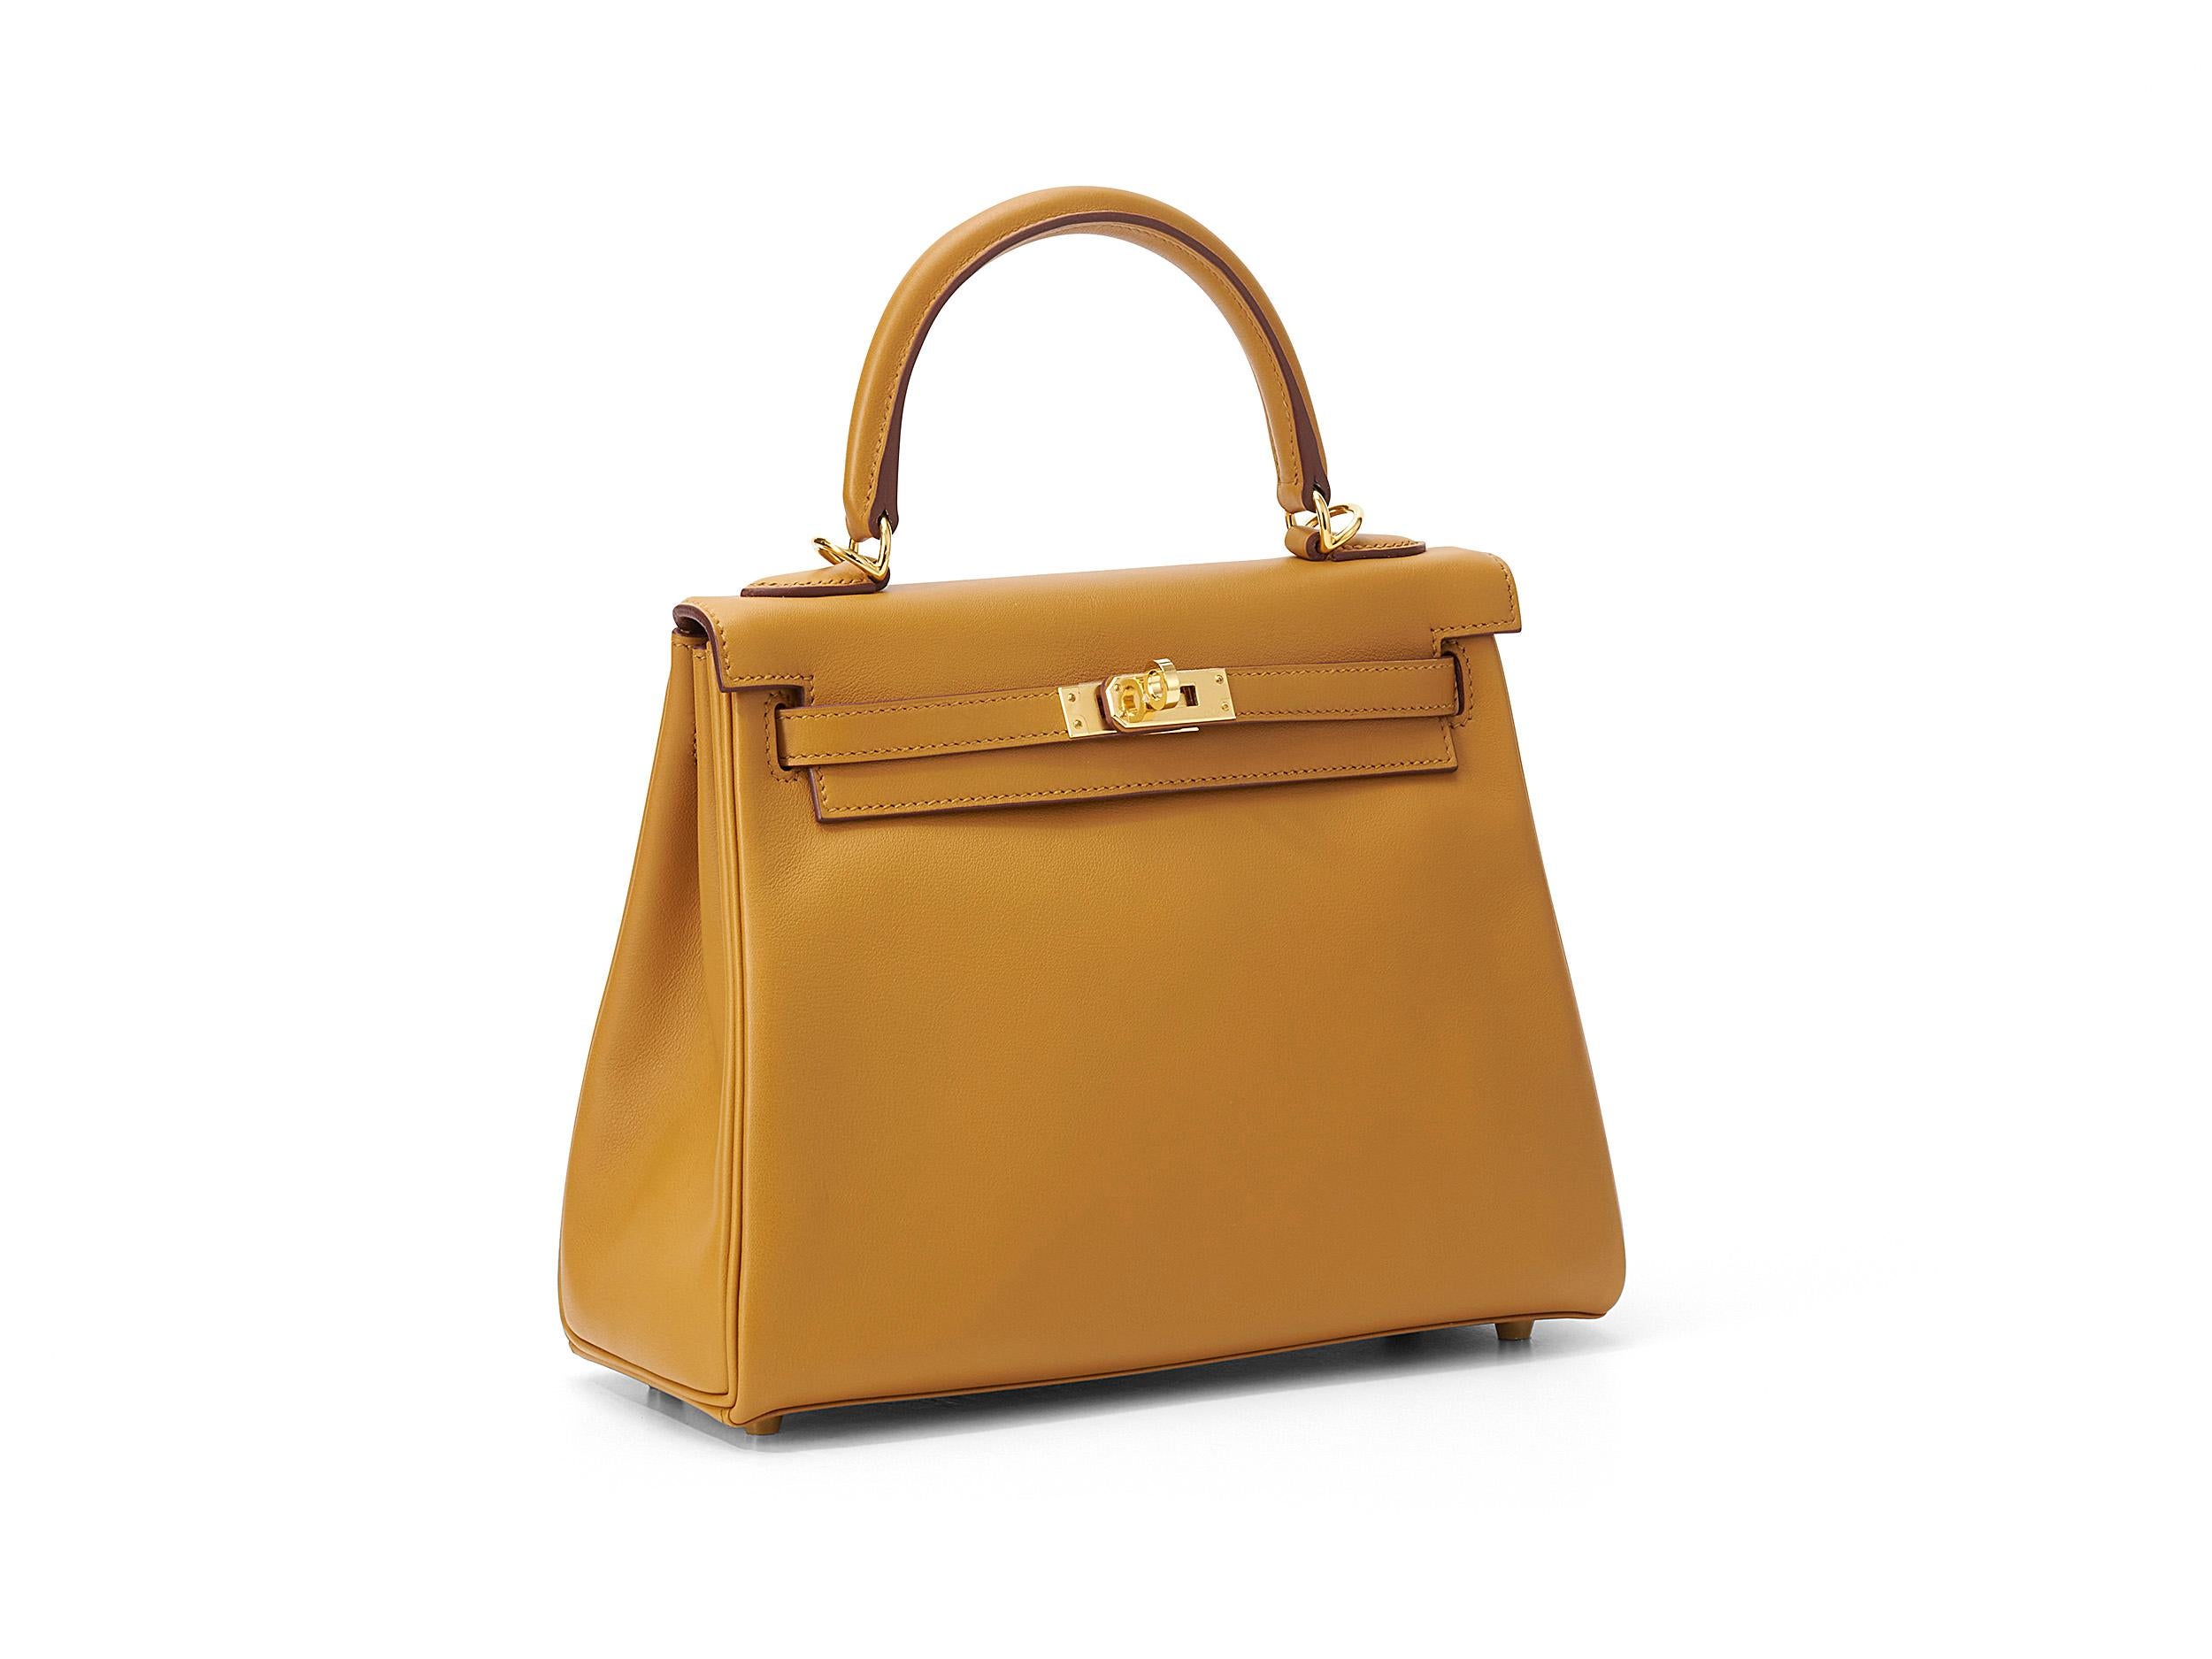 Hermès Kelly 25 in sesame and swift leather with gold hardware. The bag is unworn and comes as full set including the original receipt.

Stamp Y (2020) 

